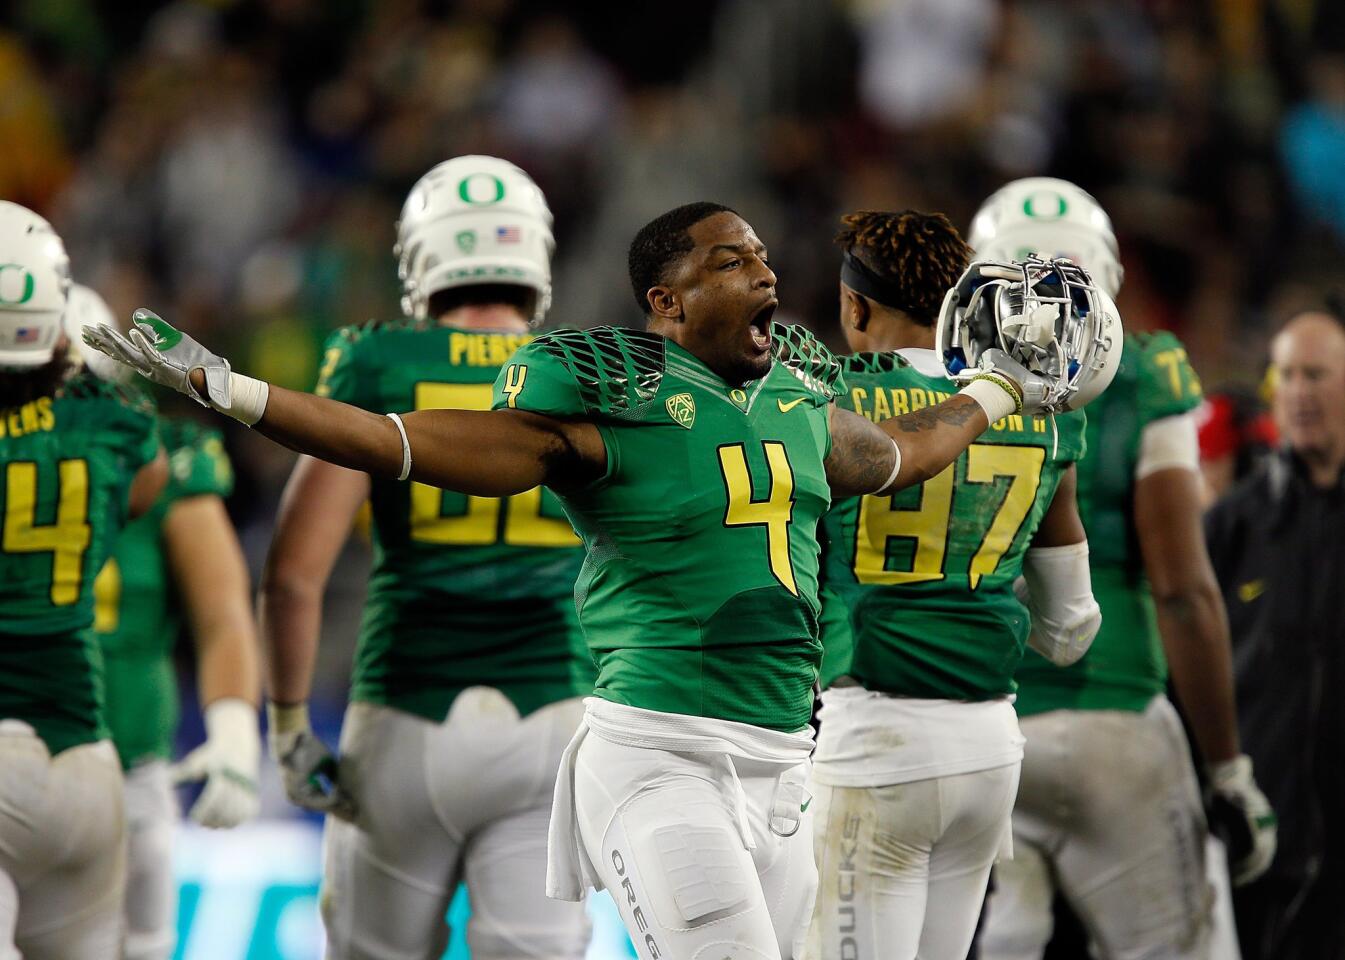 Oregon defensive back Erick Dargan turns toward fans and celebrates during the Ducks' 51-13 victory over the Arizona Wildcats in the Pac-12 Conference championship game on Friday night at Levi's Stadium in Santa Clara.